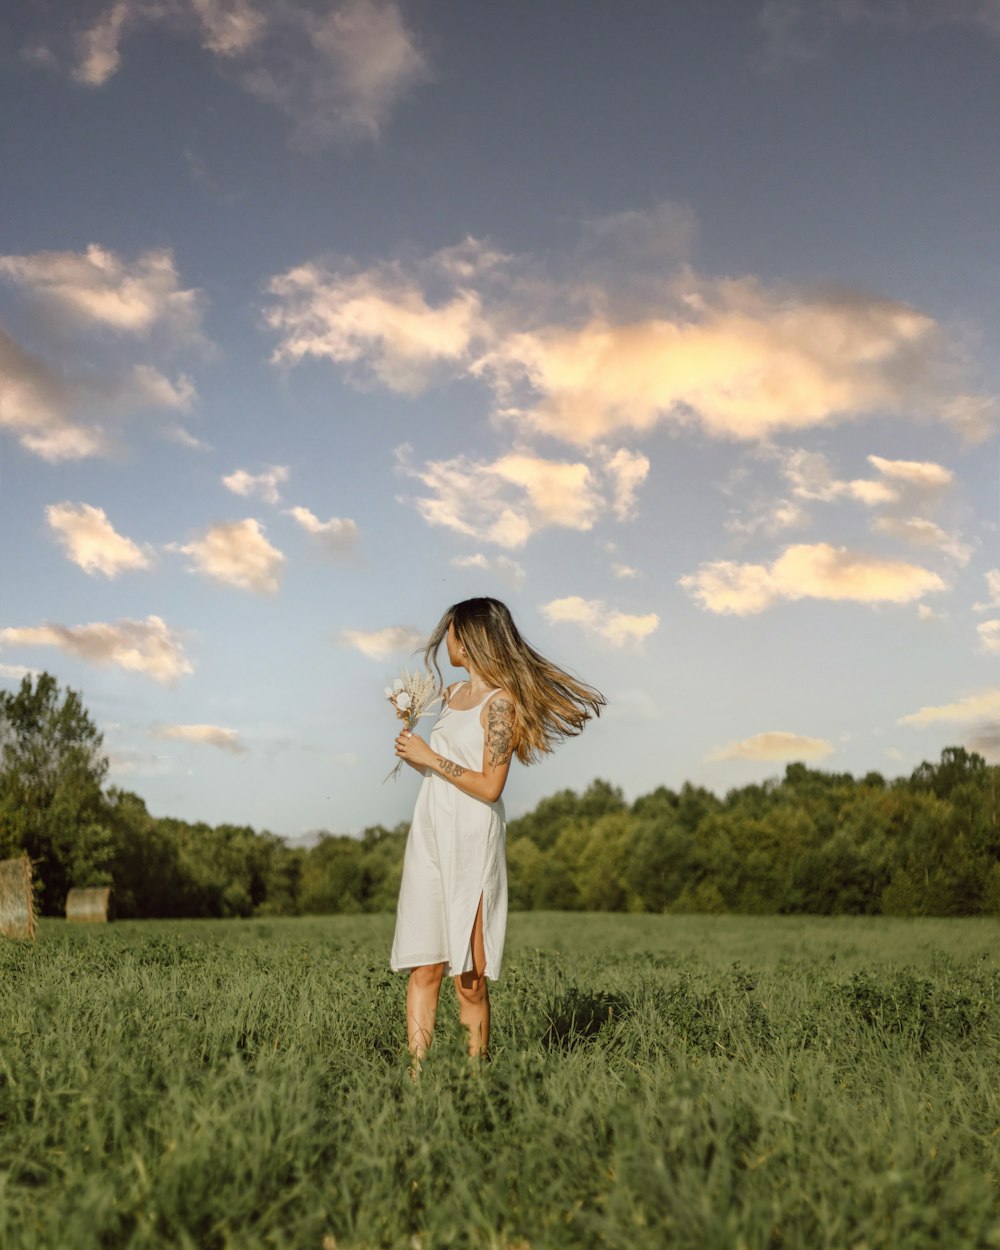 woman in white dress standing on green grass field under blue and white cloudy sky during